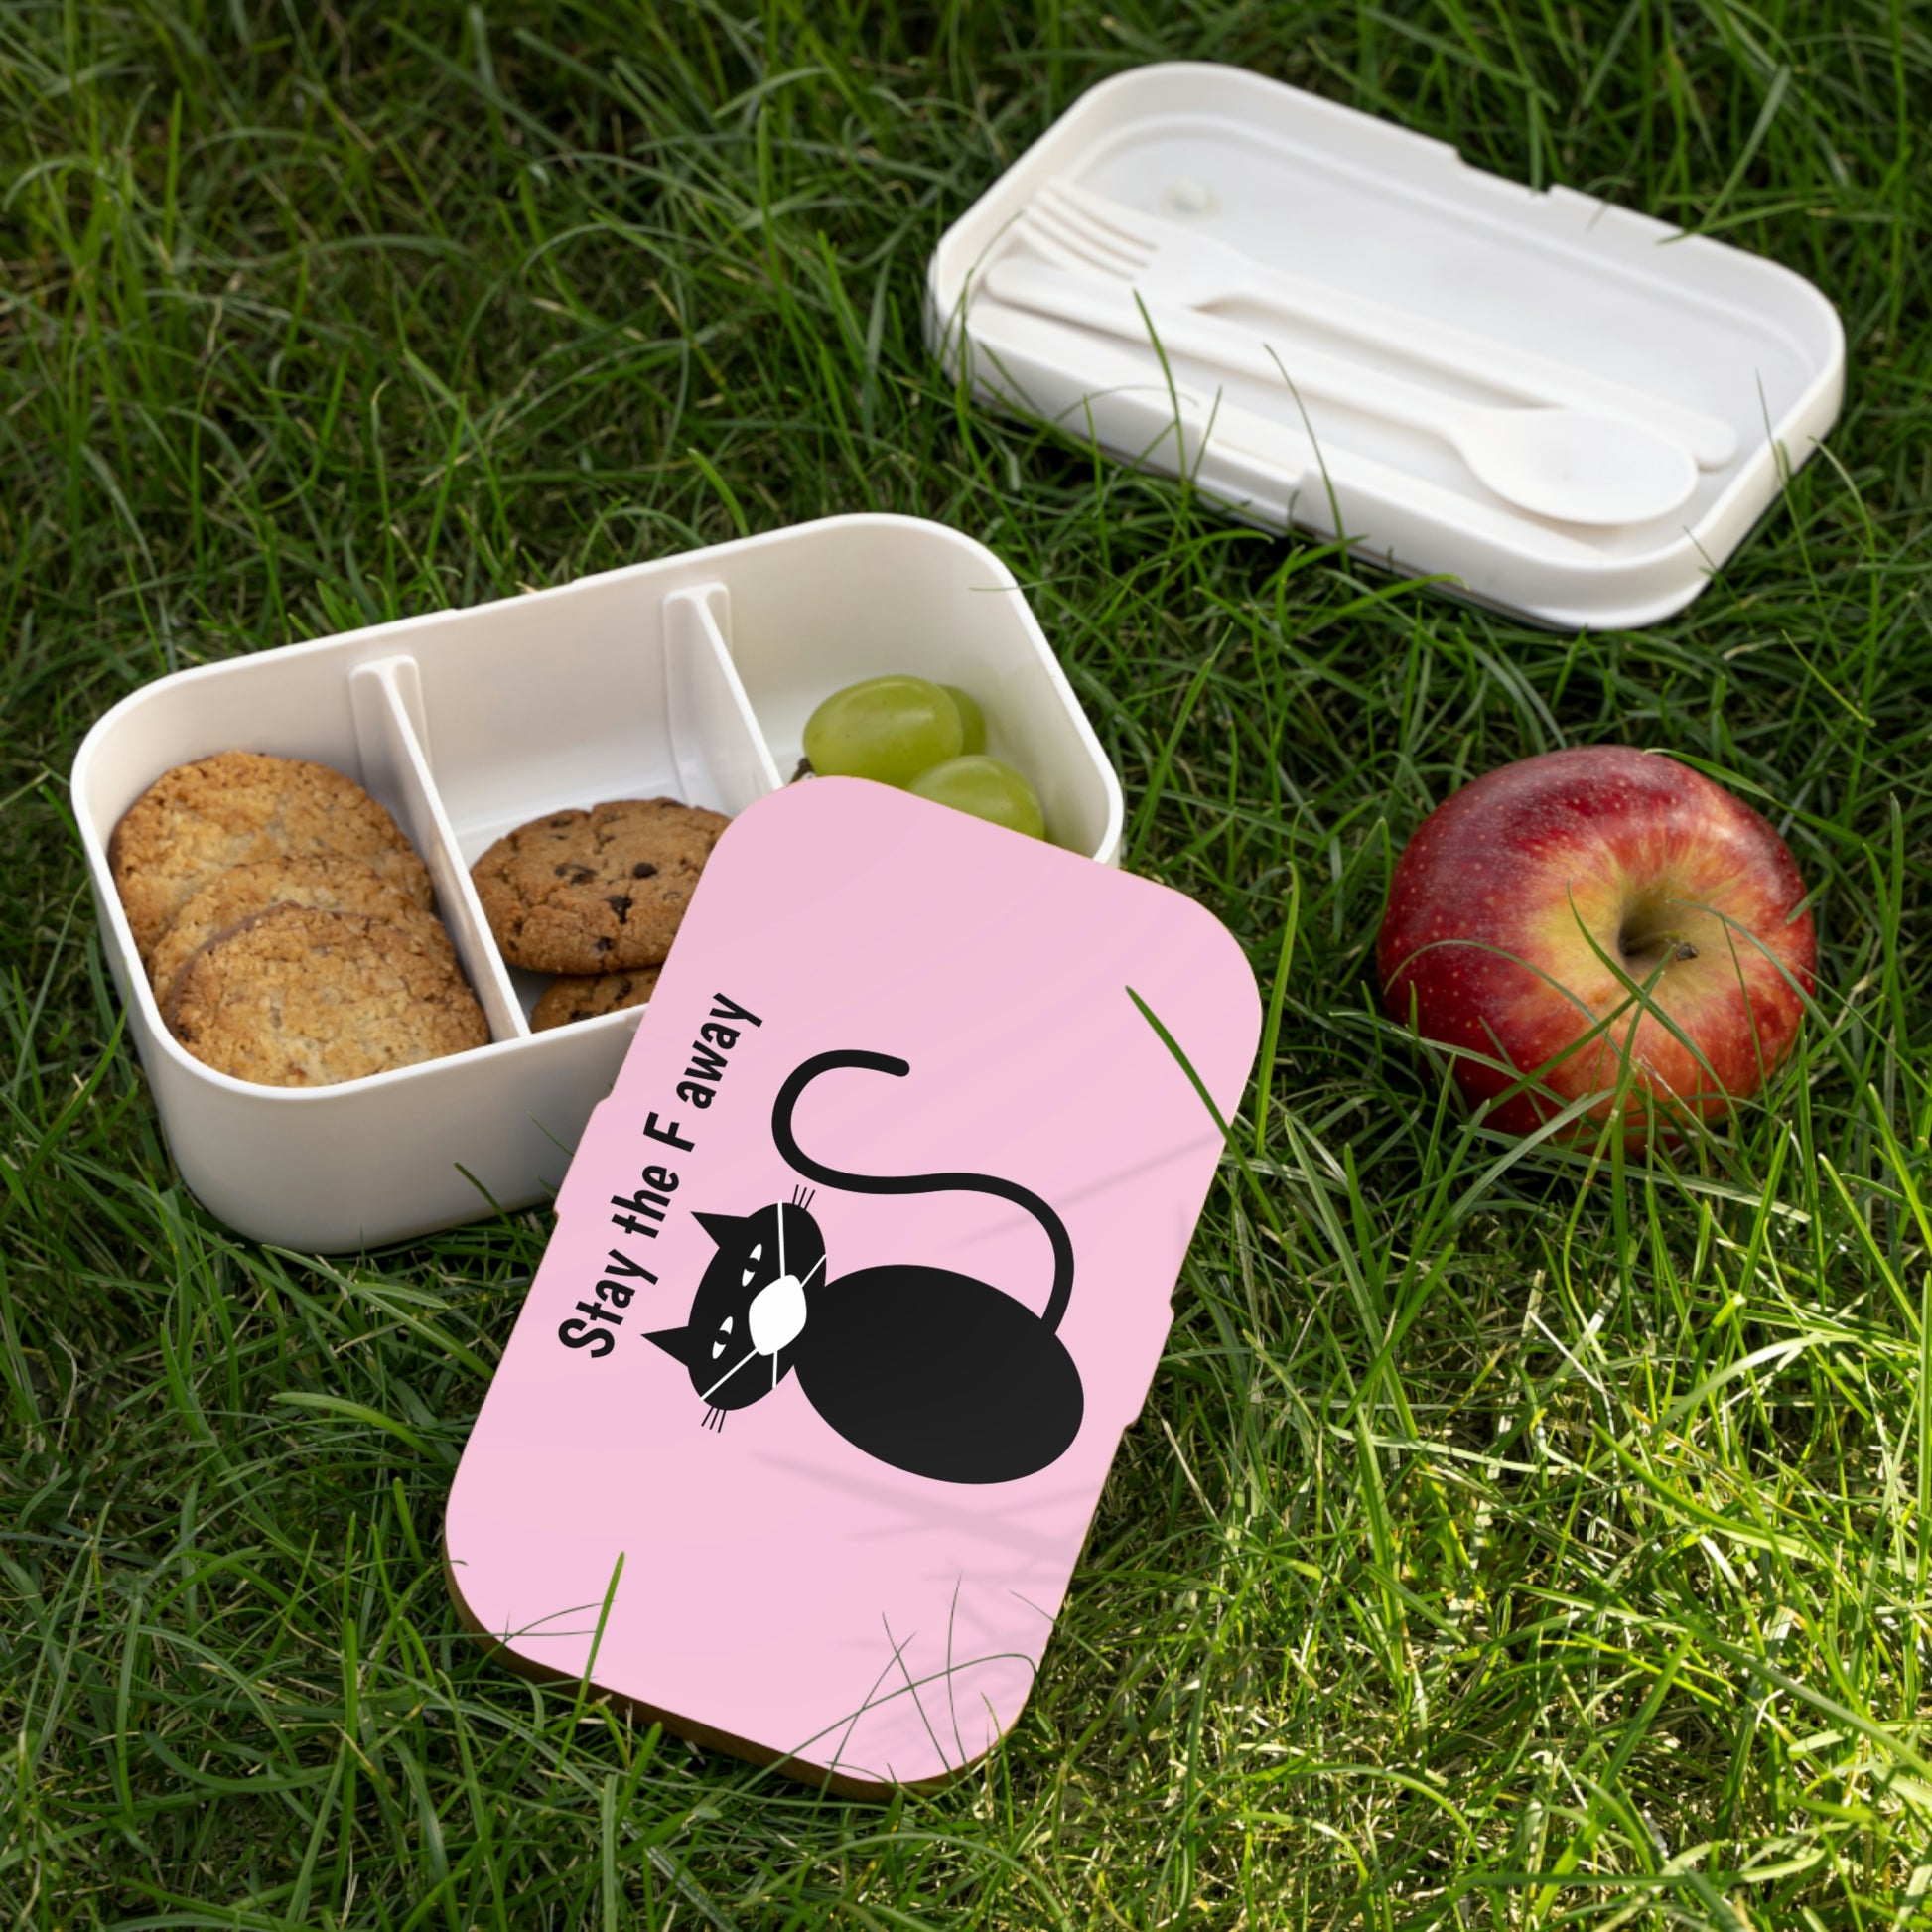 Black cat Stay the F away Bento Lunch Box, funny cat Lunch Box, cat lover gift, back to school, kawaii bento box, sarcastic cute bento box